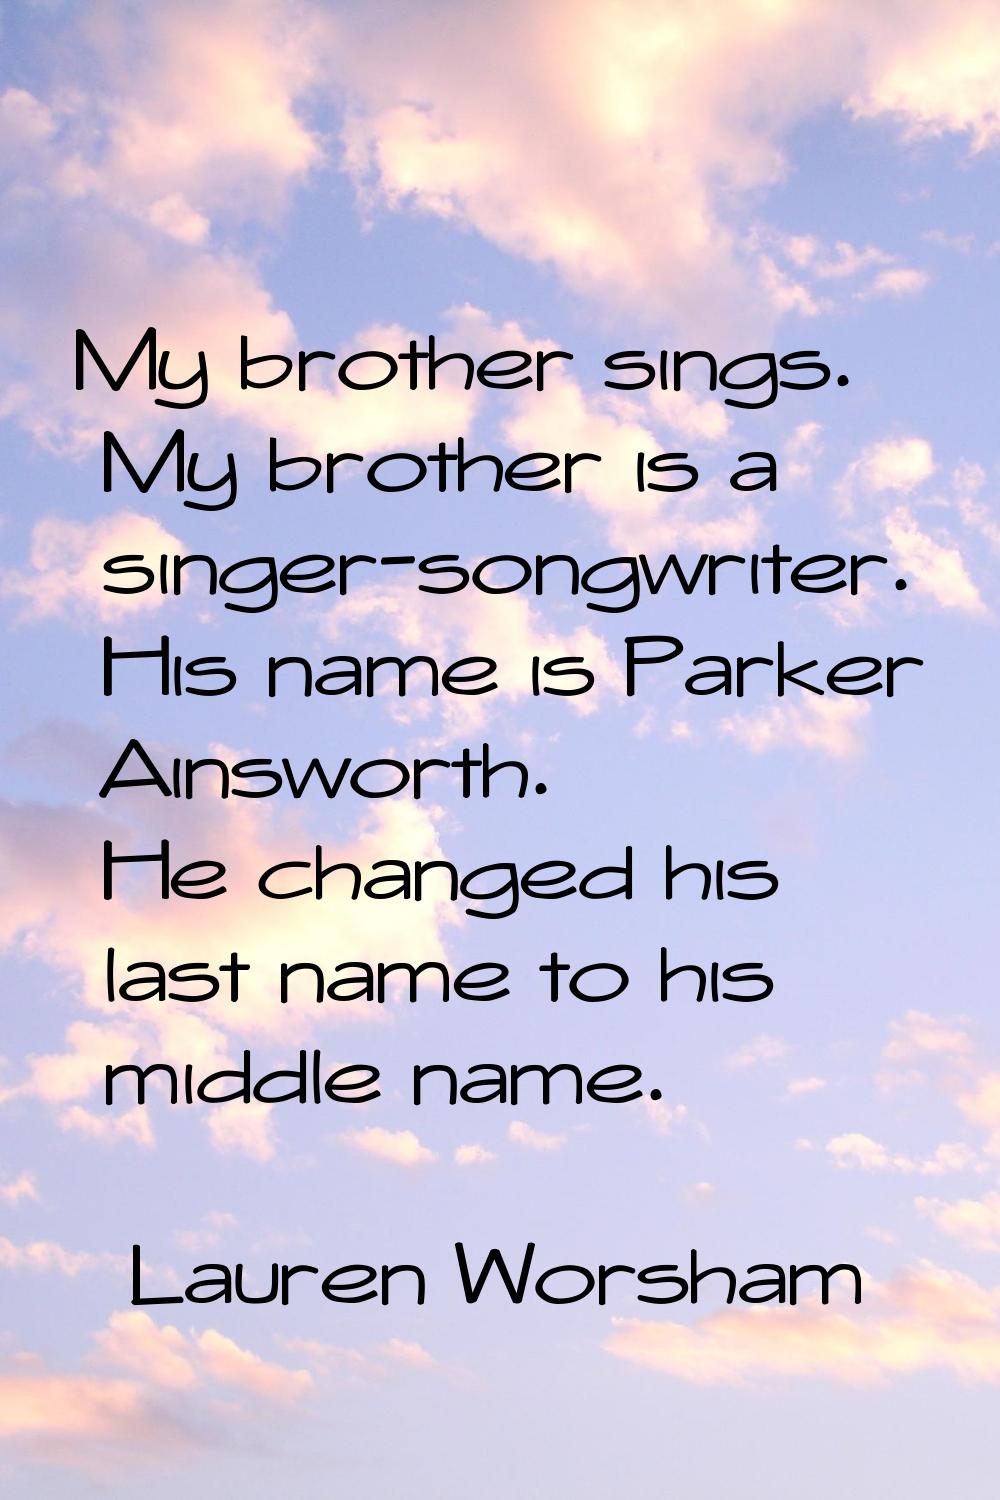 My brother sings. My brother is a singer-songwriter. His name is Parker Ainsworth. He changed his l